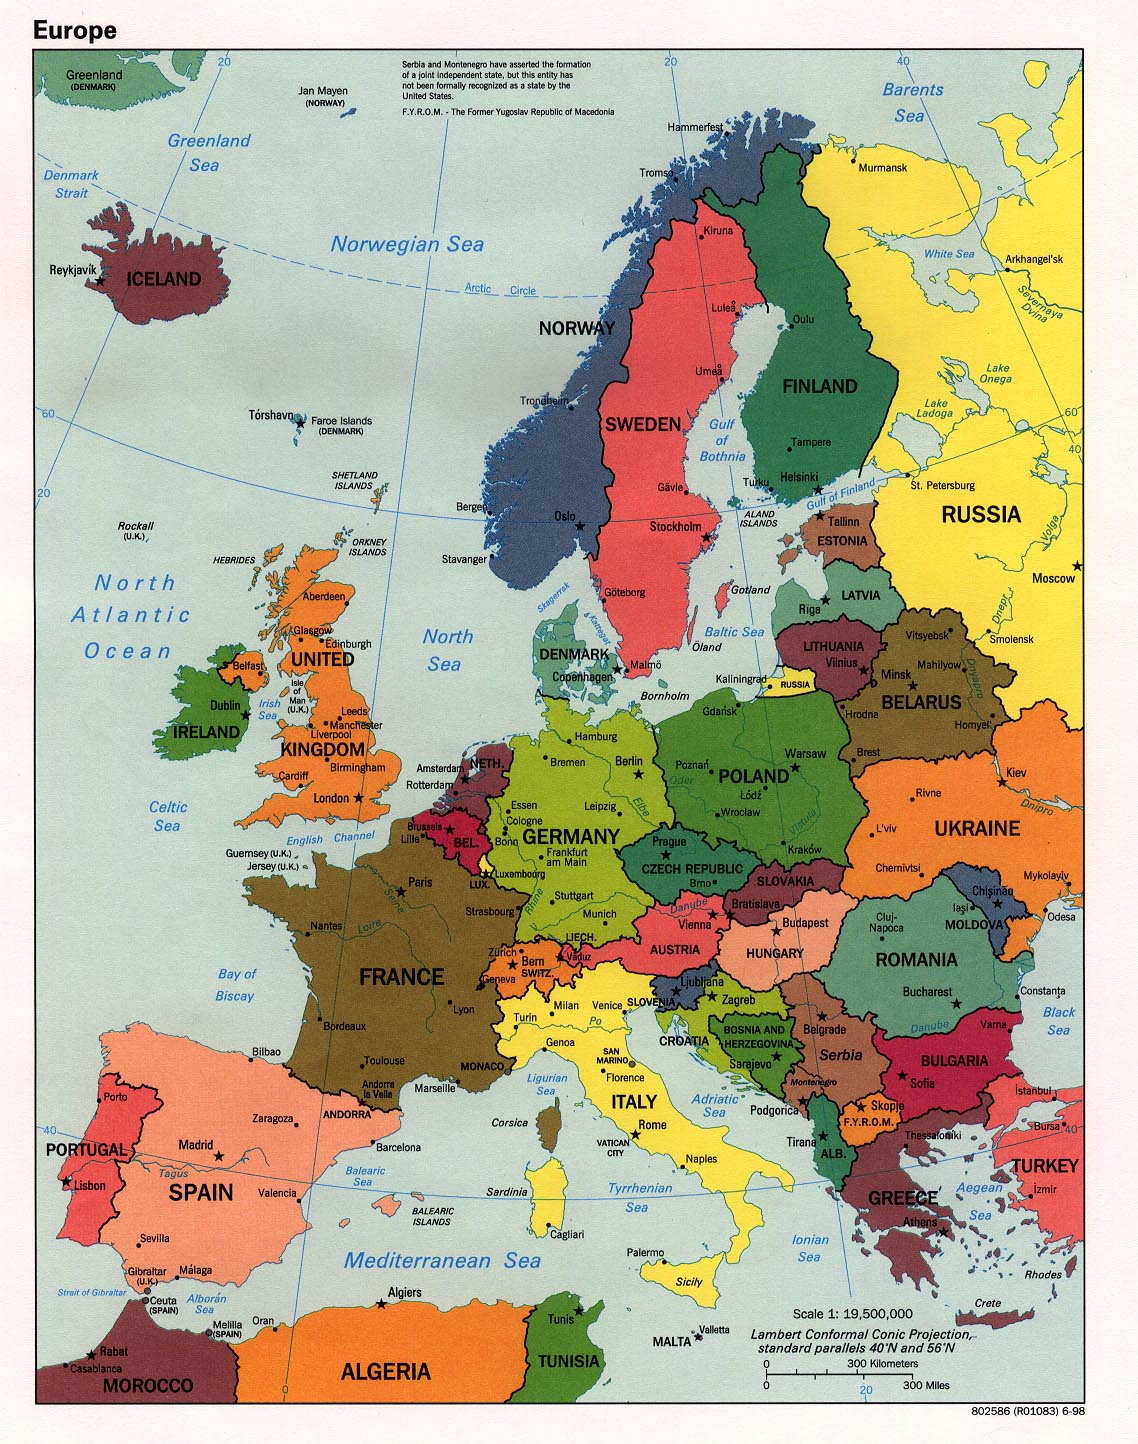 Europe Maps - Perry-Castañeda Map Collection - UT Library Online